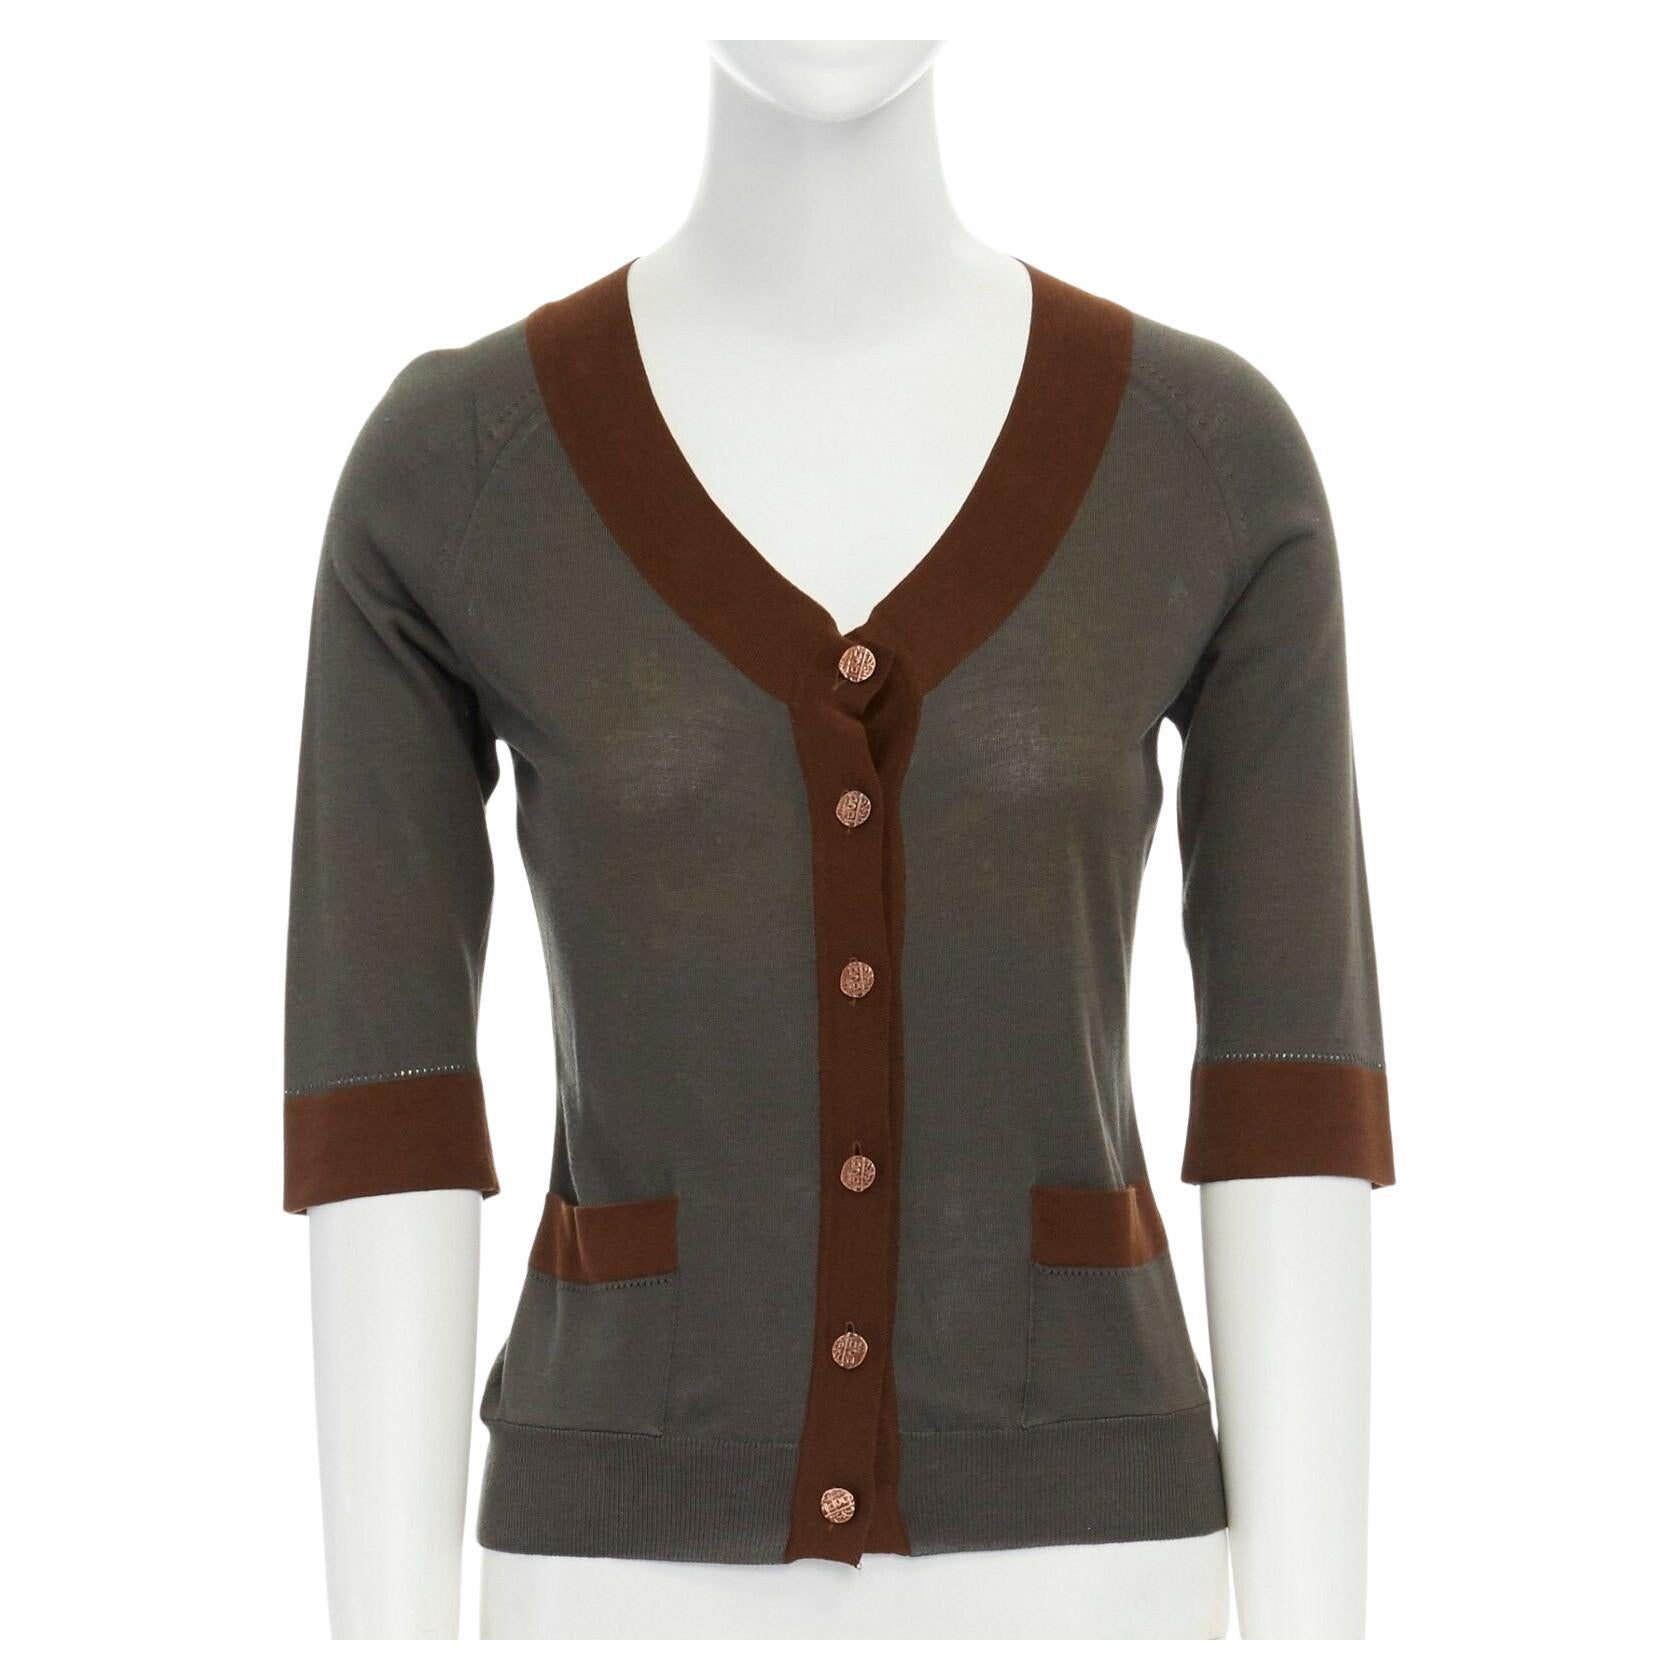 GRAEME BLACK grey brown trimmed copper button 3/4 sleeves cardigan sweater  IT40